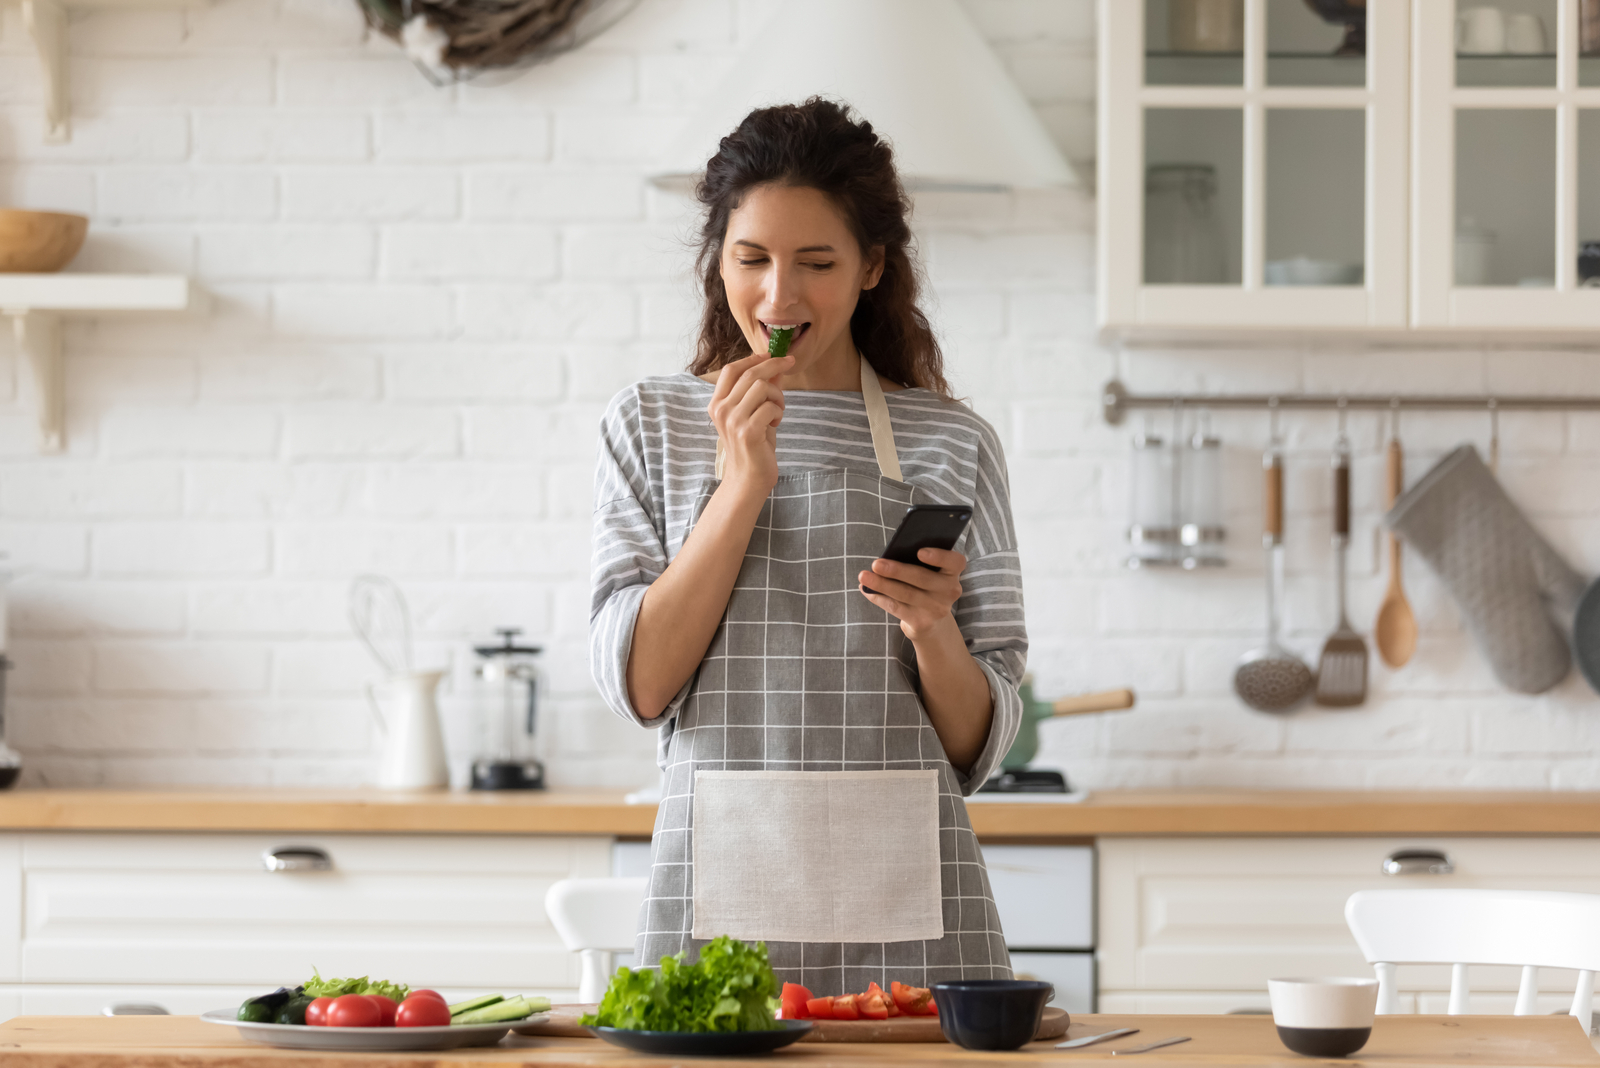 woman with phone in hand standing in kitchen